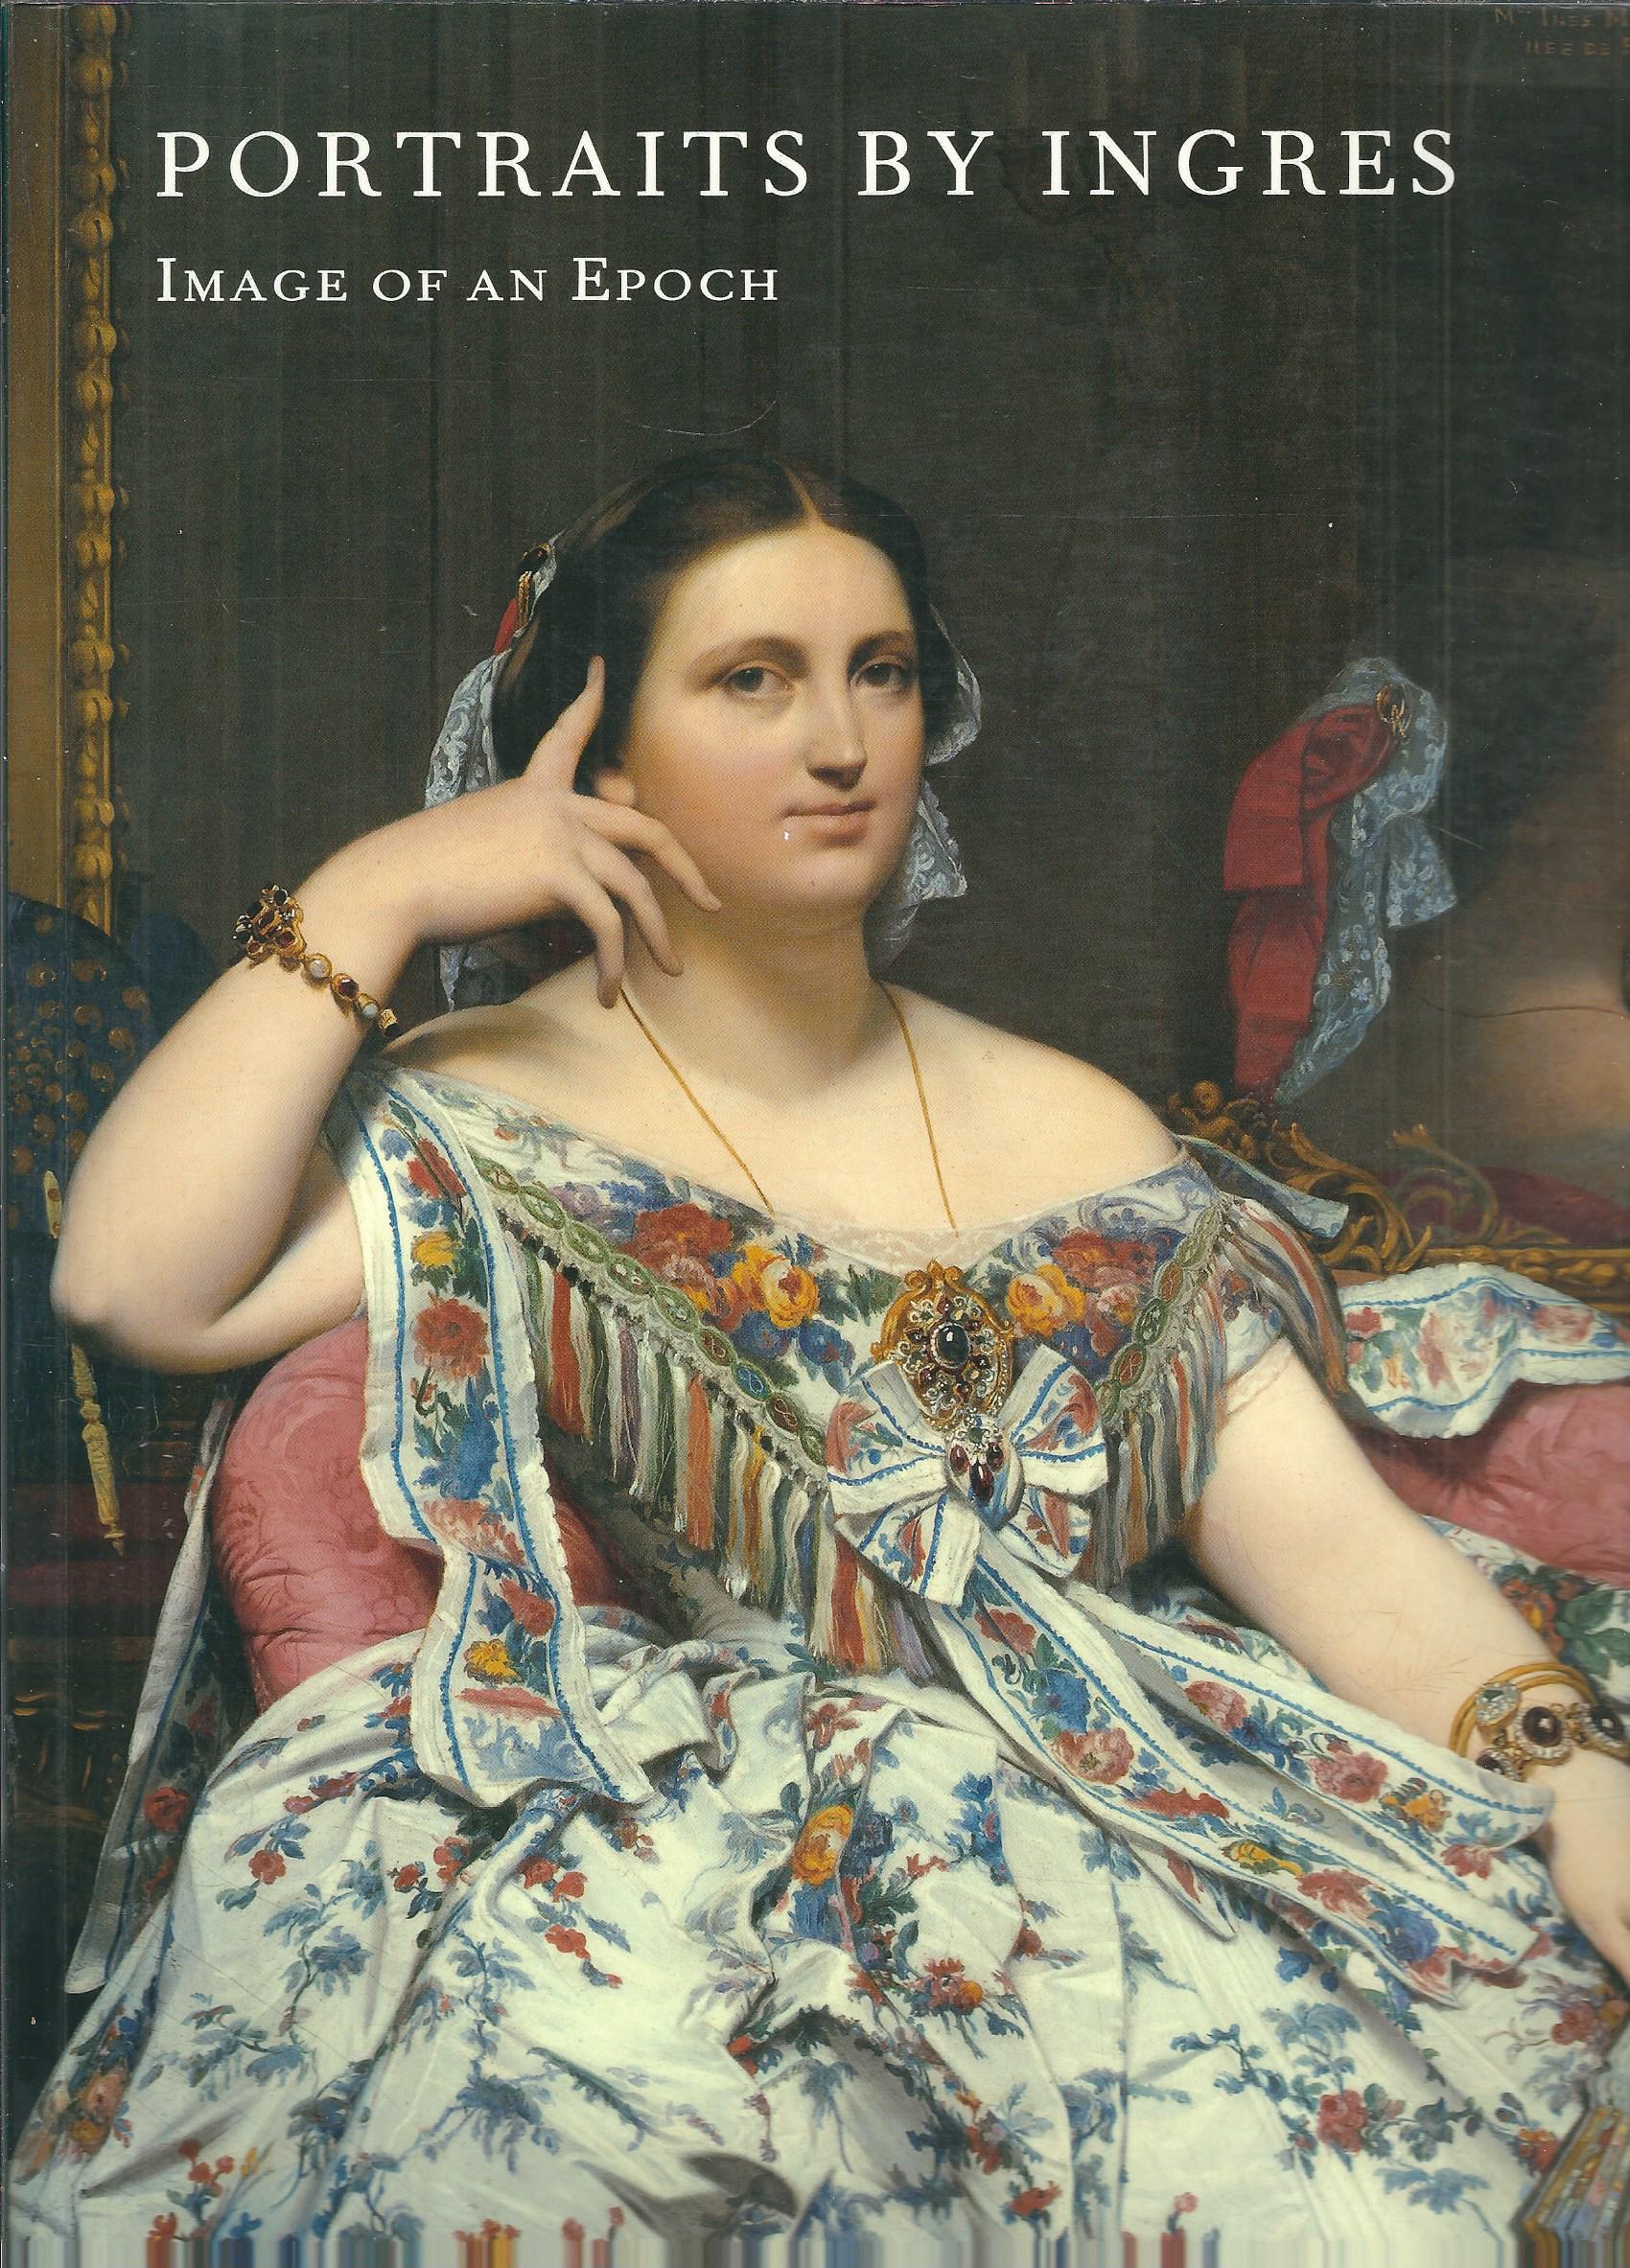 PORTRAITS BY INGRES - IMAGE OF AN EPOCH